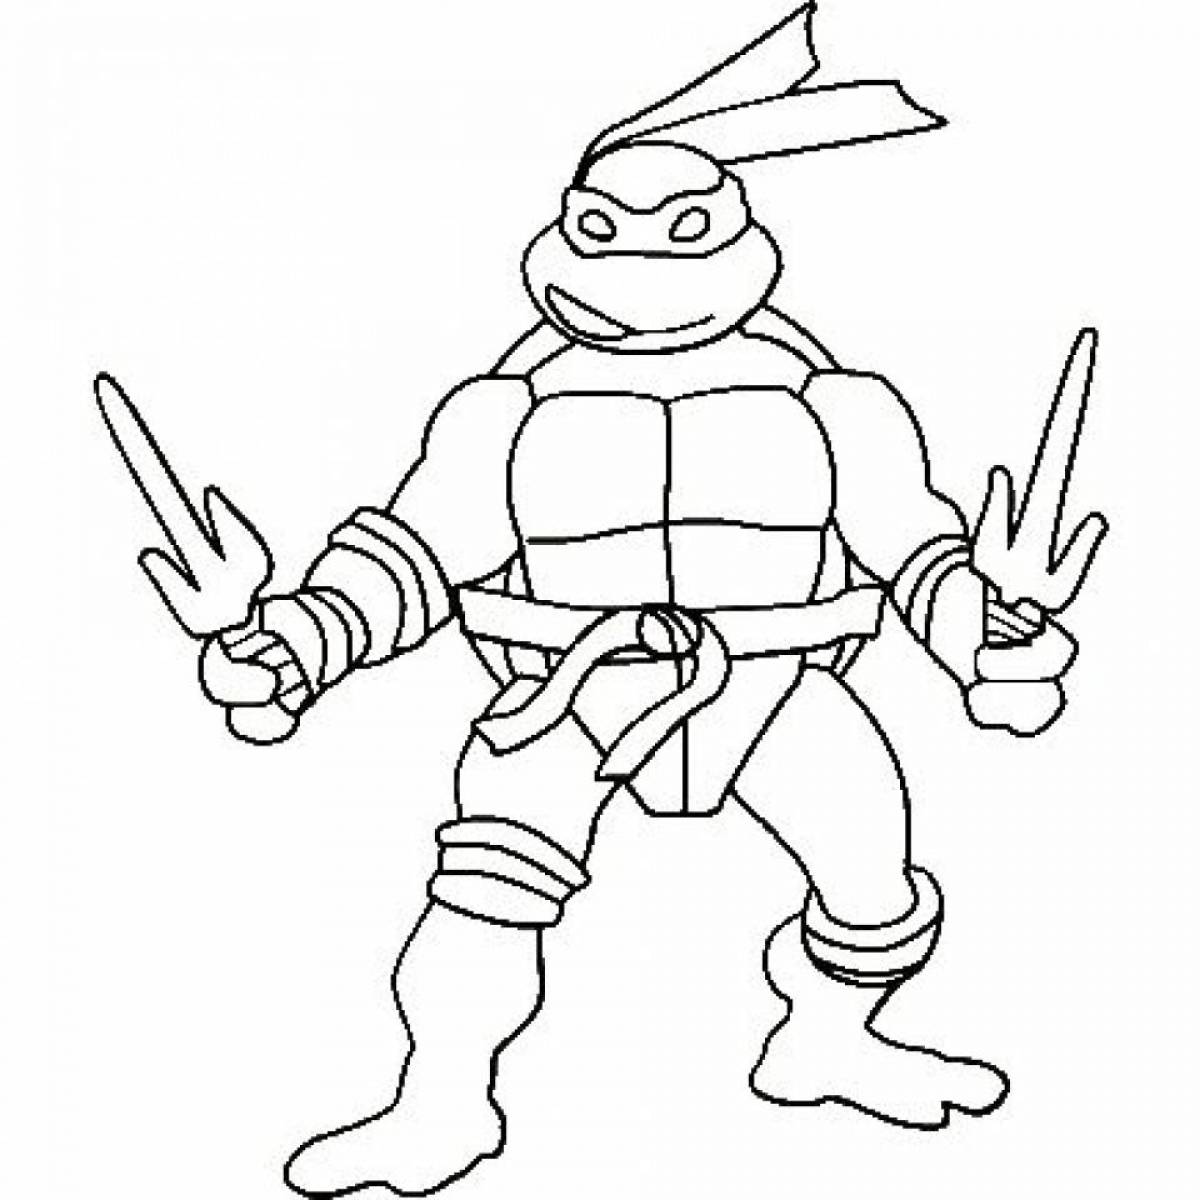 A fun coloring book for kids with ninja turtles